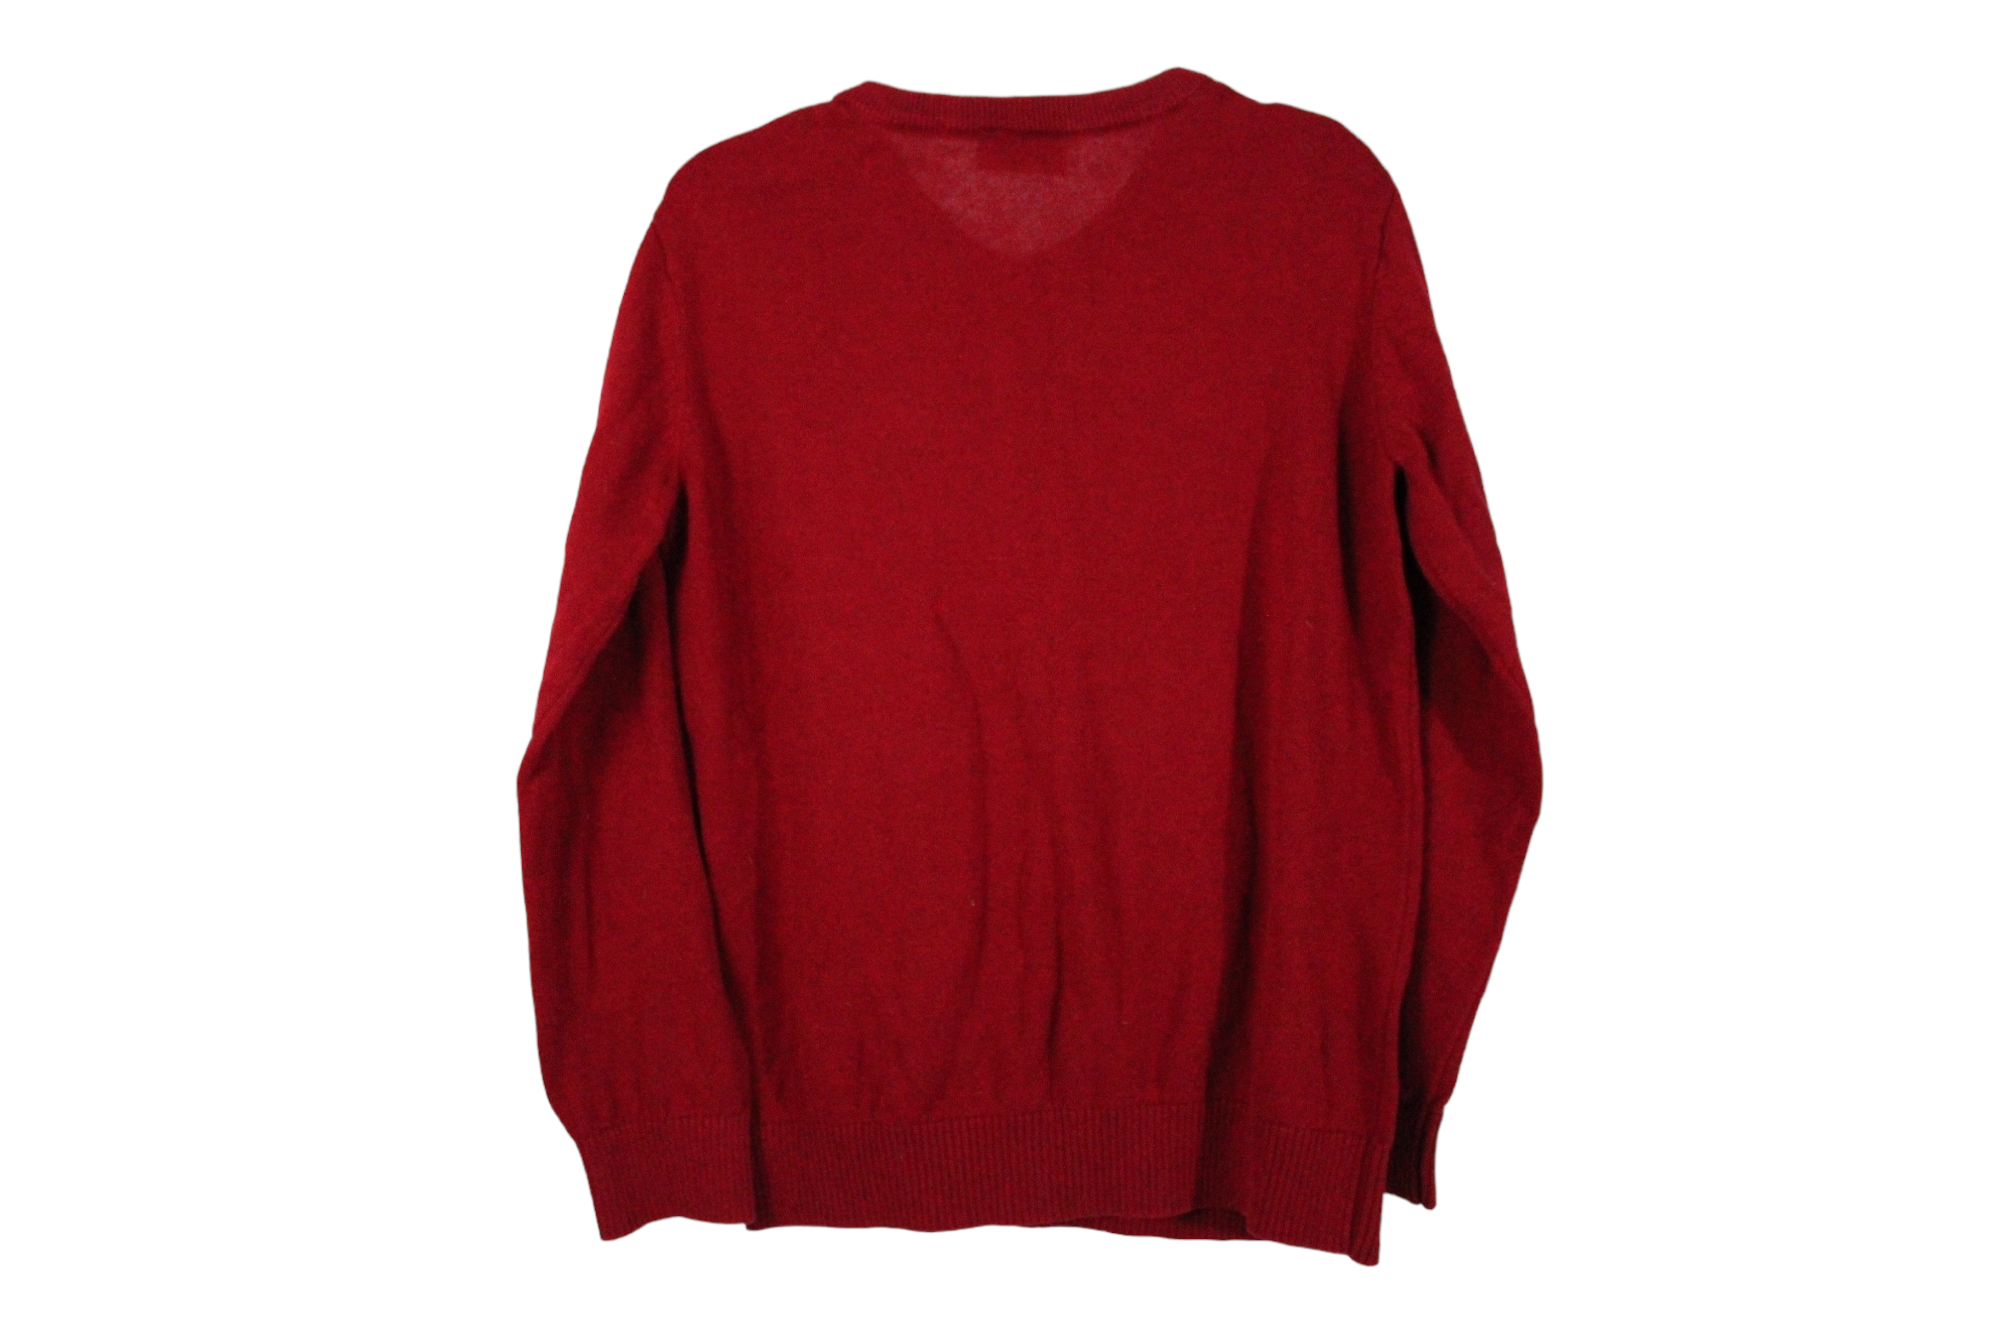 Children's Place Red Knit Sweater | 14